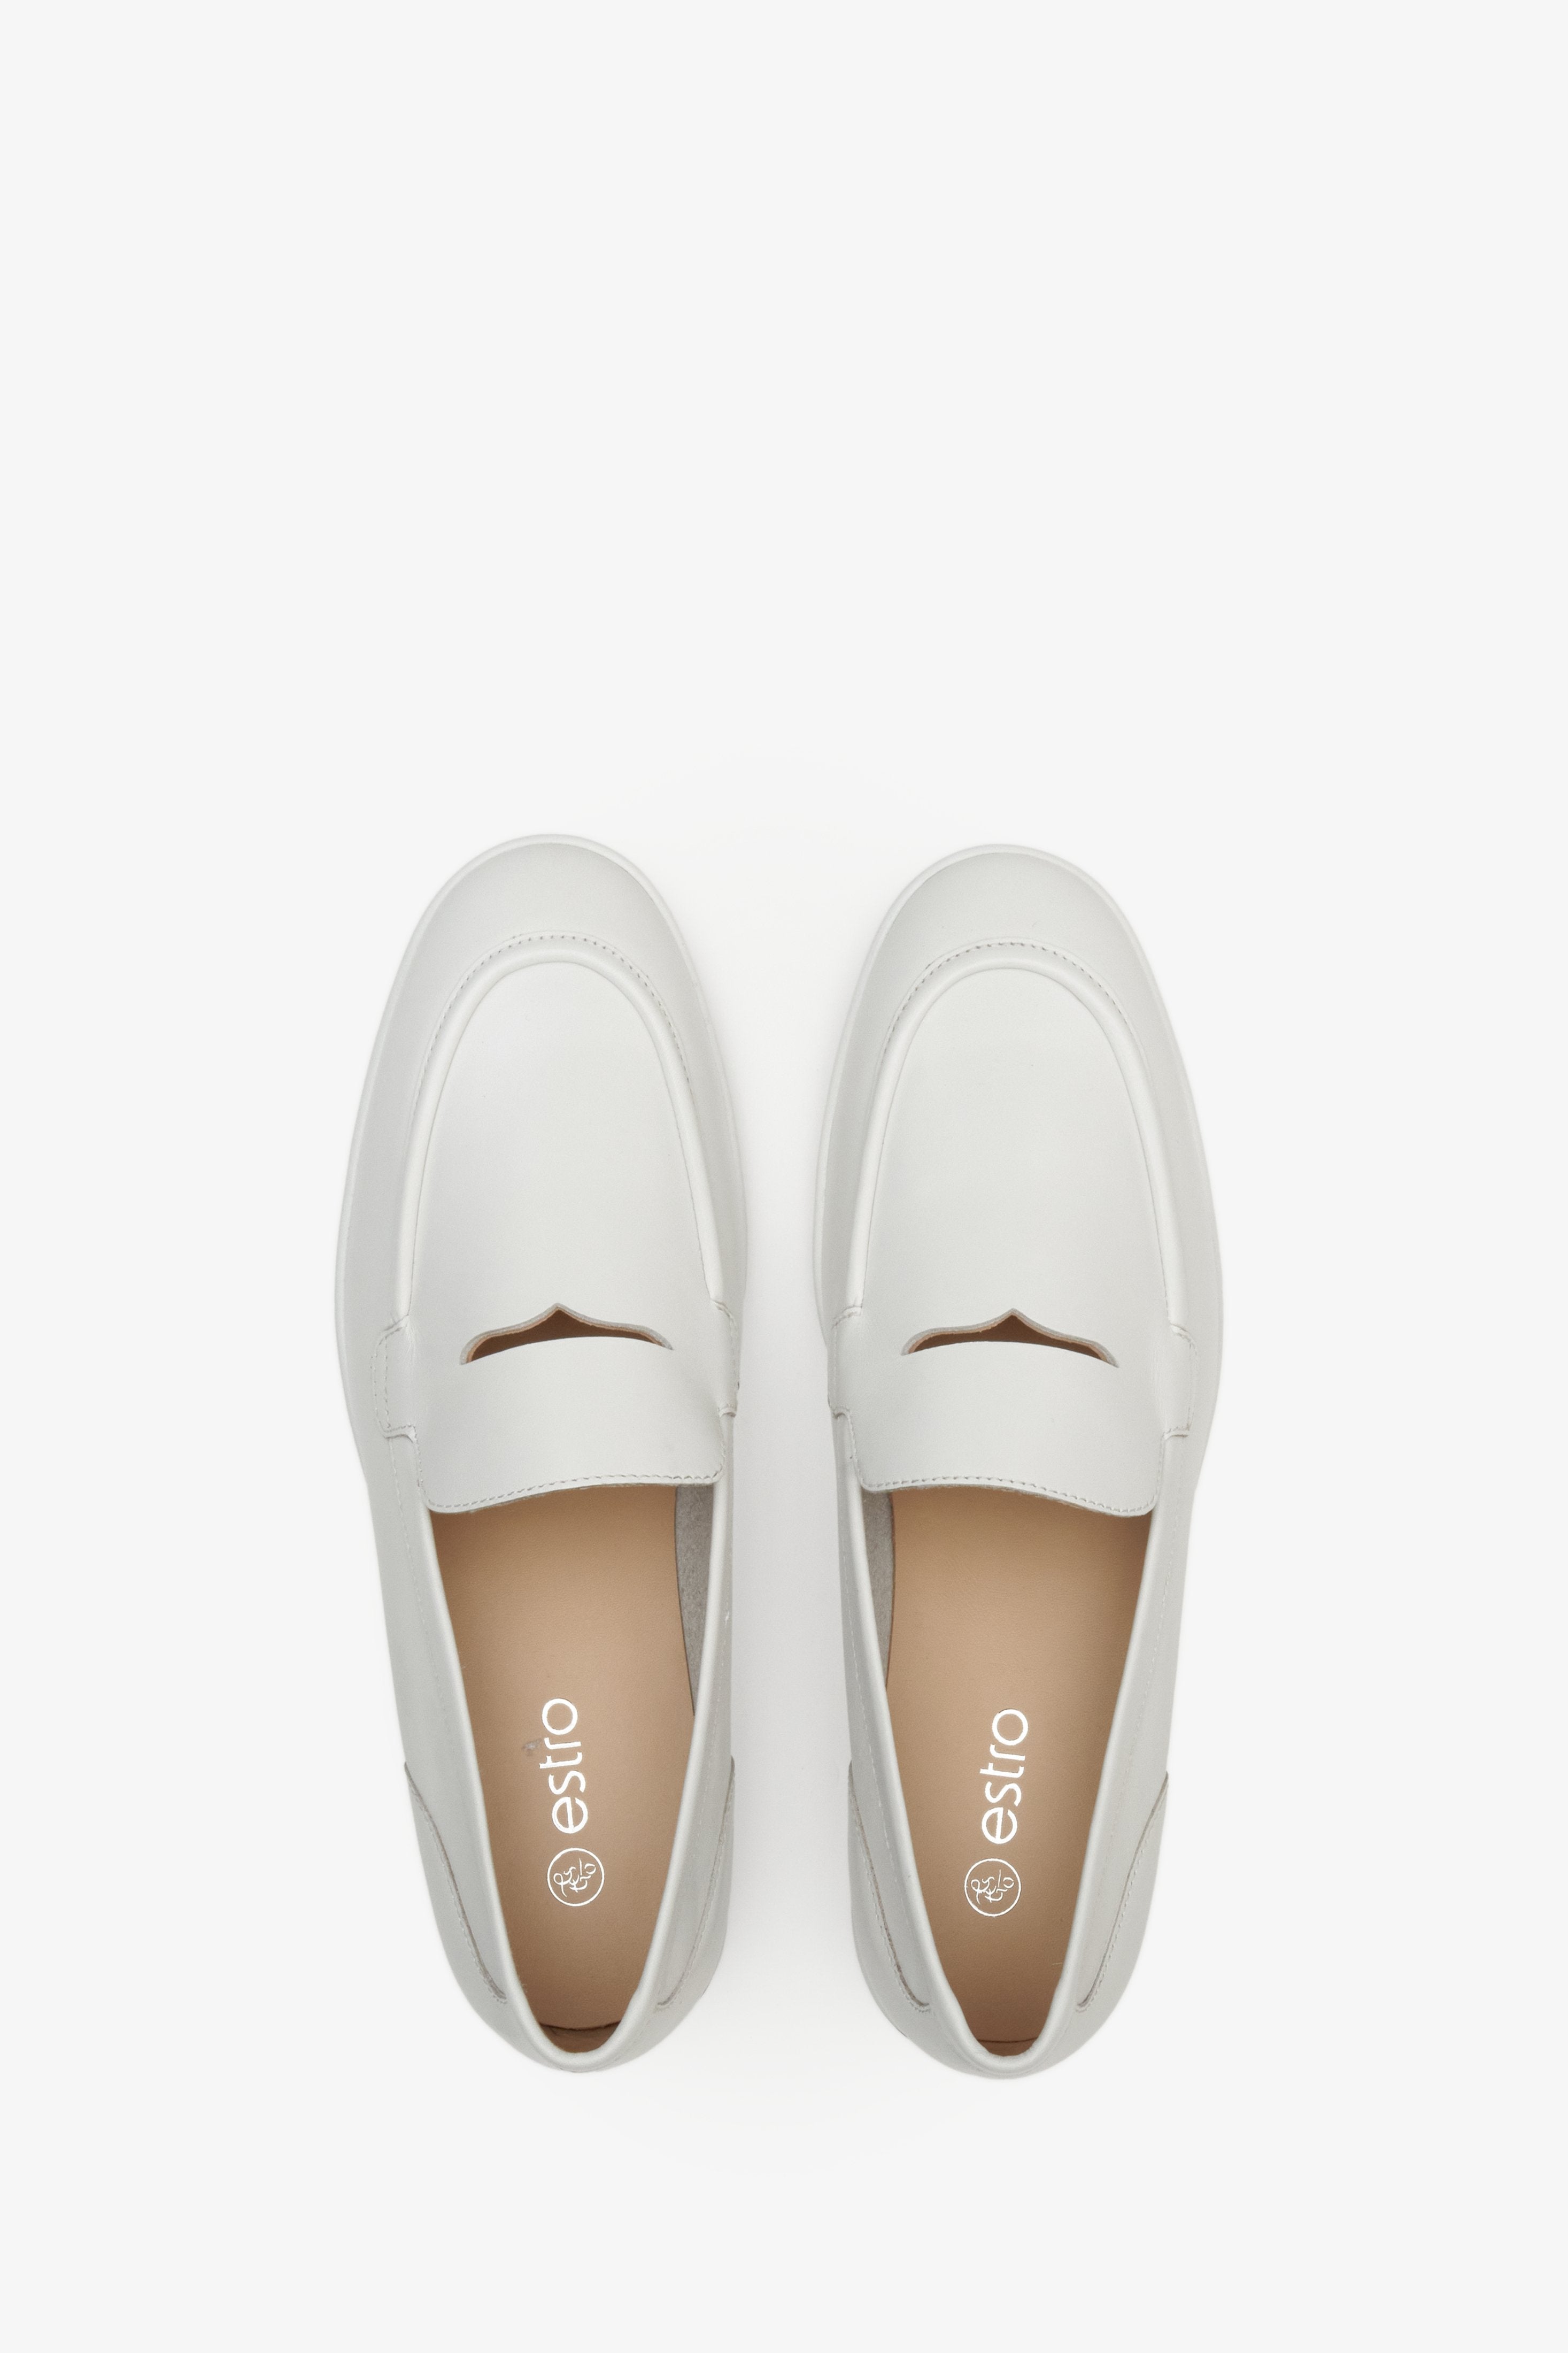 Women's Estro brand white moccasins made of genuine leather - top view presentation of footwear.